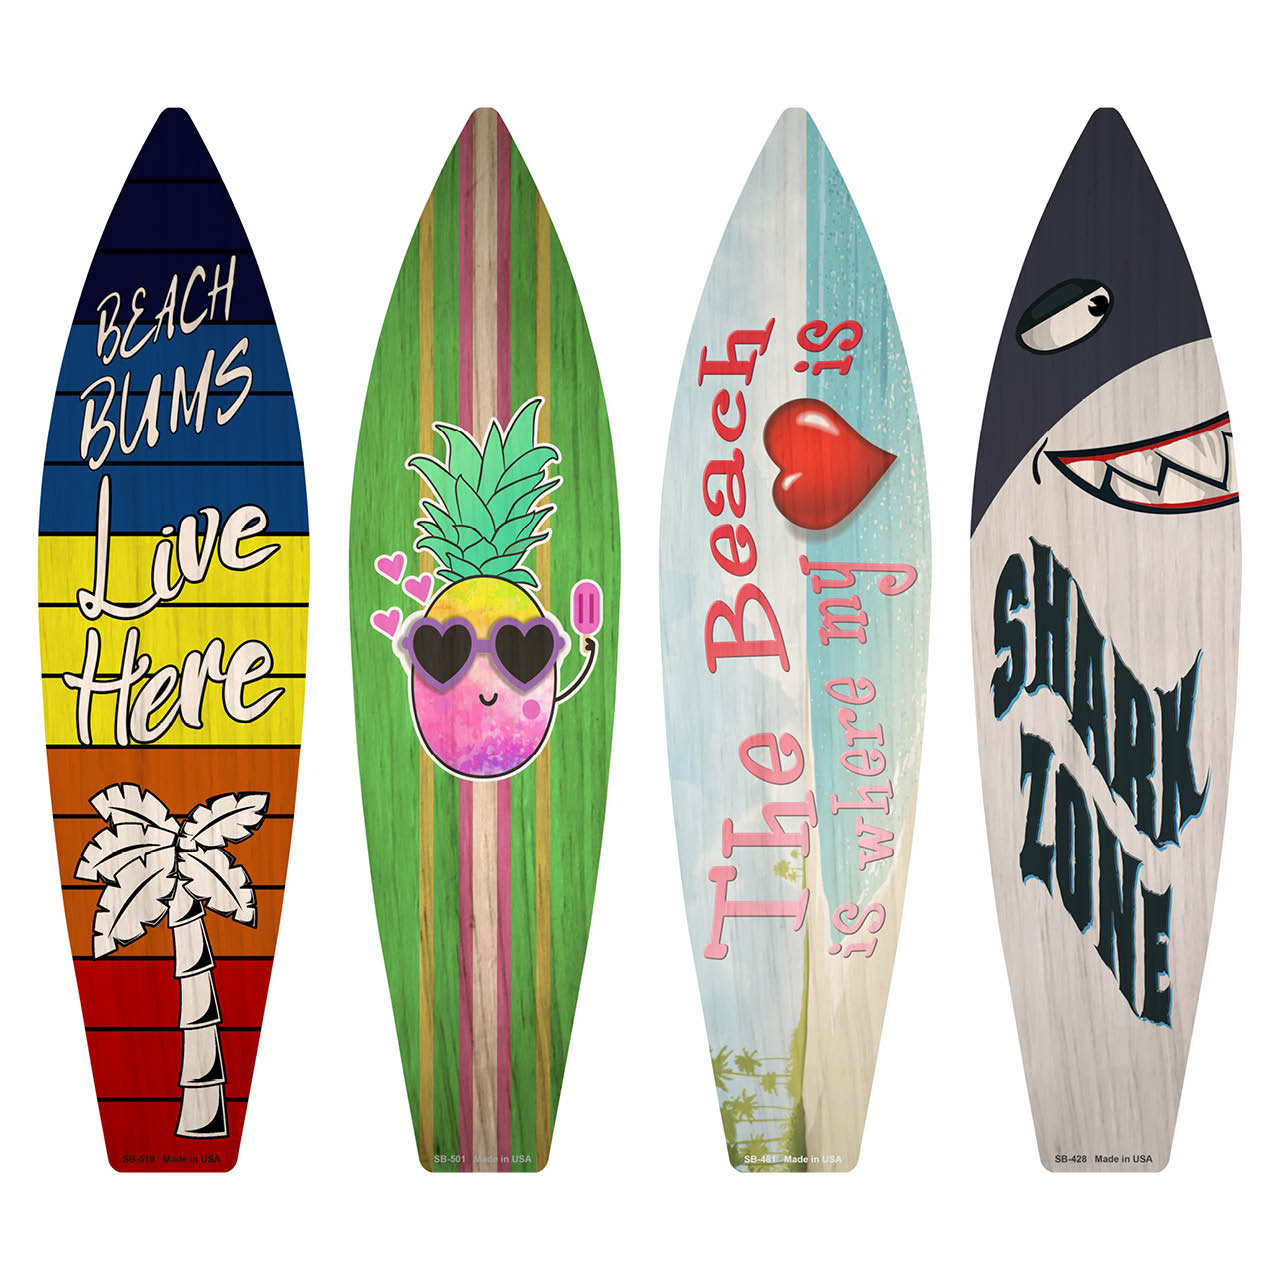 At the Beach Surfboard Set Wholesale Novelty Metal Set of 4 SB-Pack-06